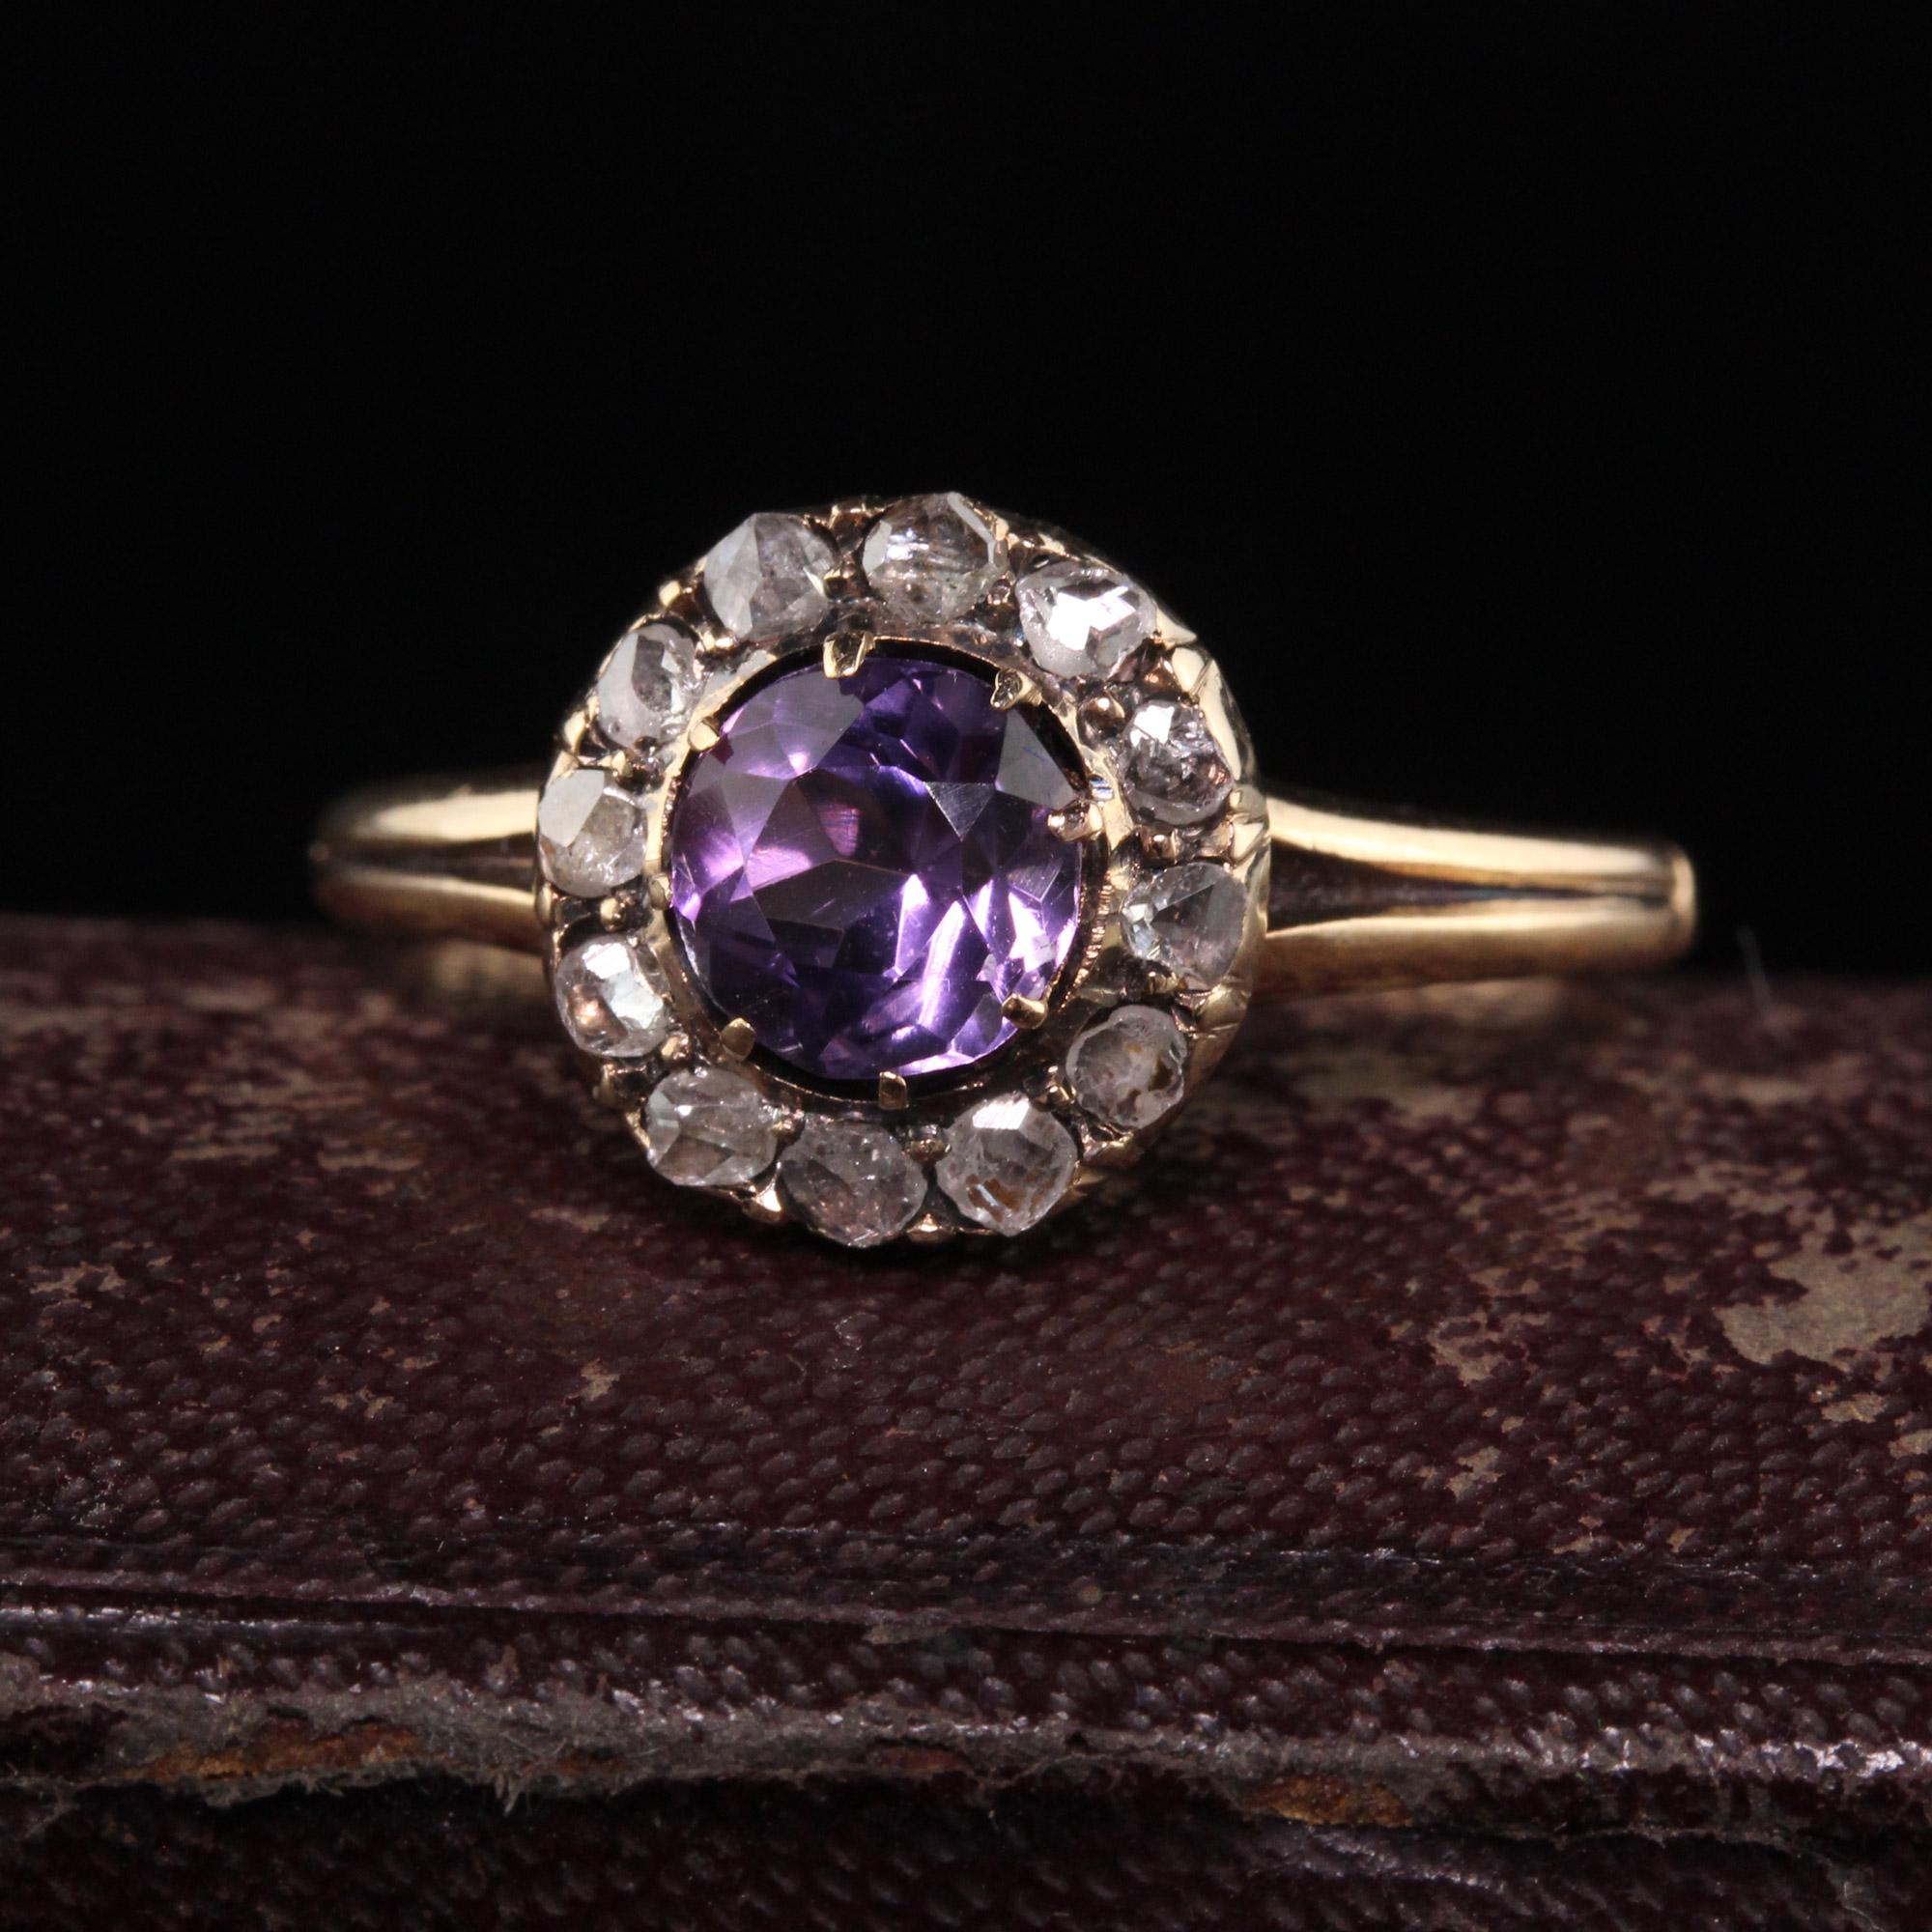 Beautiful Antique Victorian 14K Yellow Gold Rose Cut Diamond Amethyst Engagement Ring. This gorgeous engagement ring features an amethyst that is surrounded by old rose cut diamonds crafted in 14k yellow gold. It is in great condition.

Item